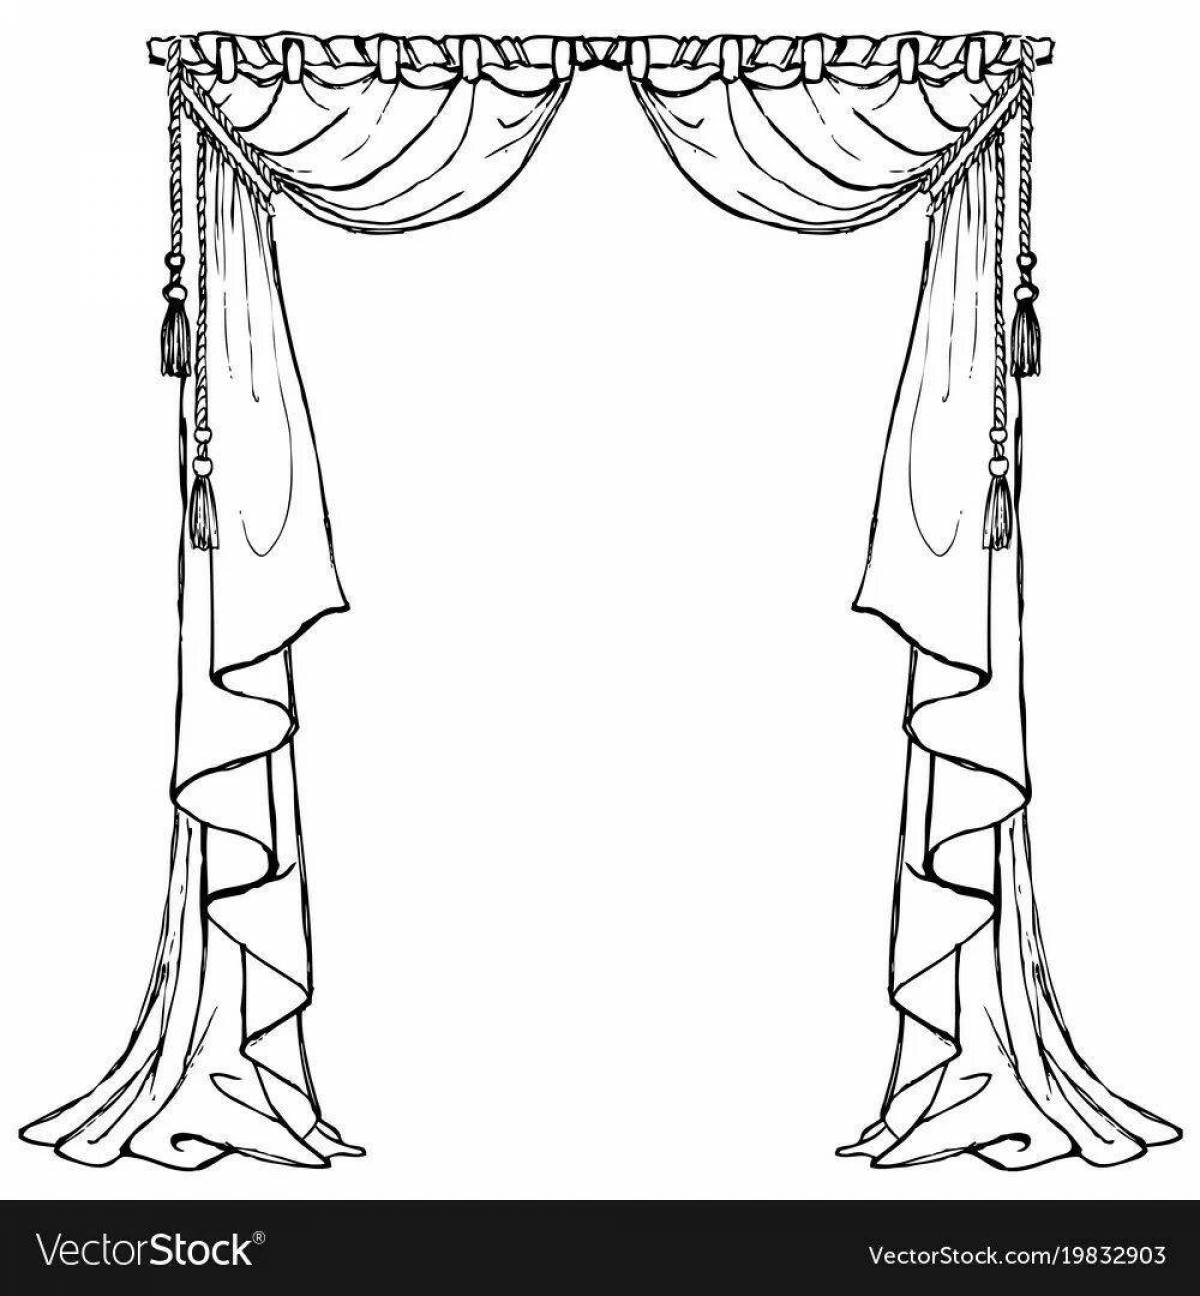 Playful theater curtain coloring page